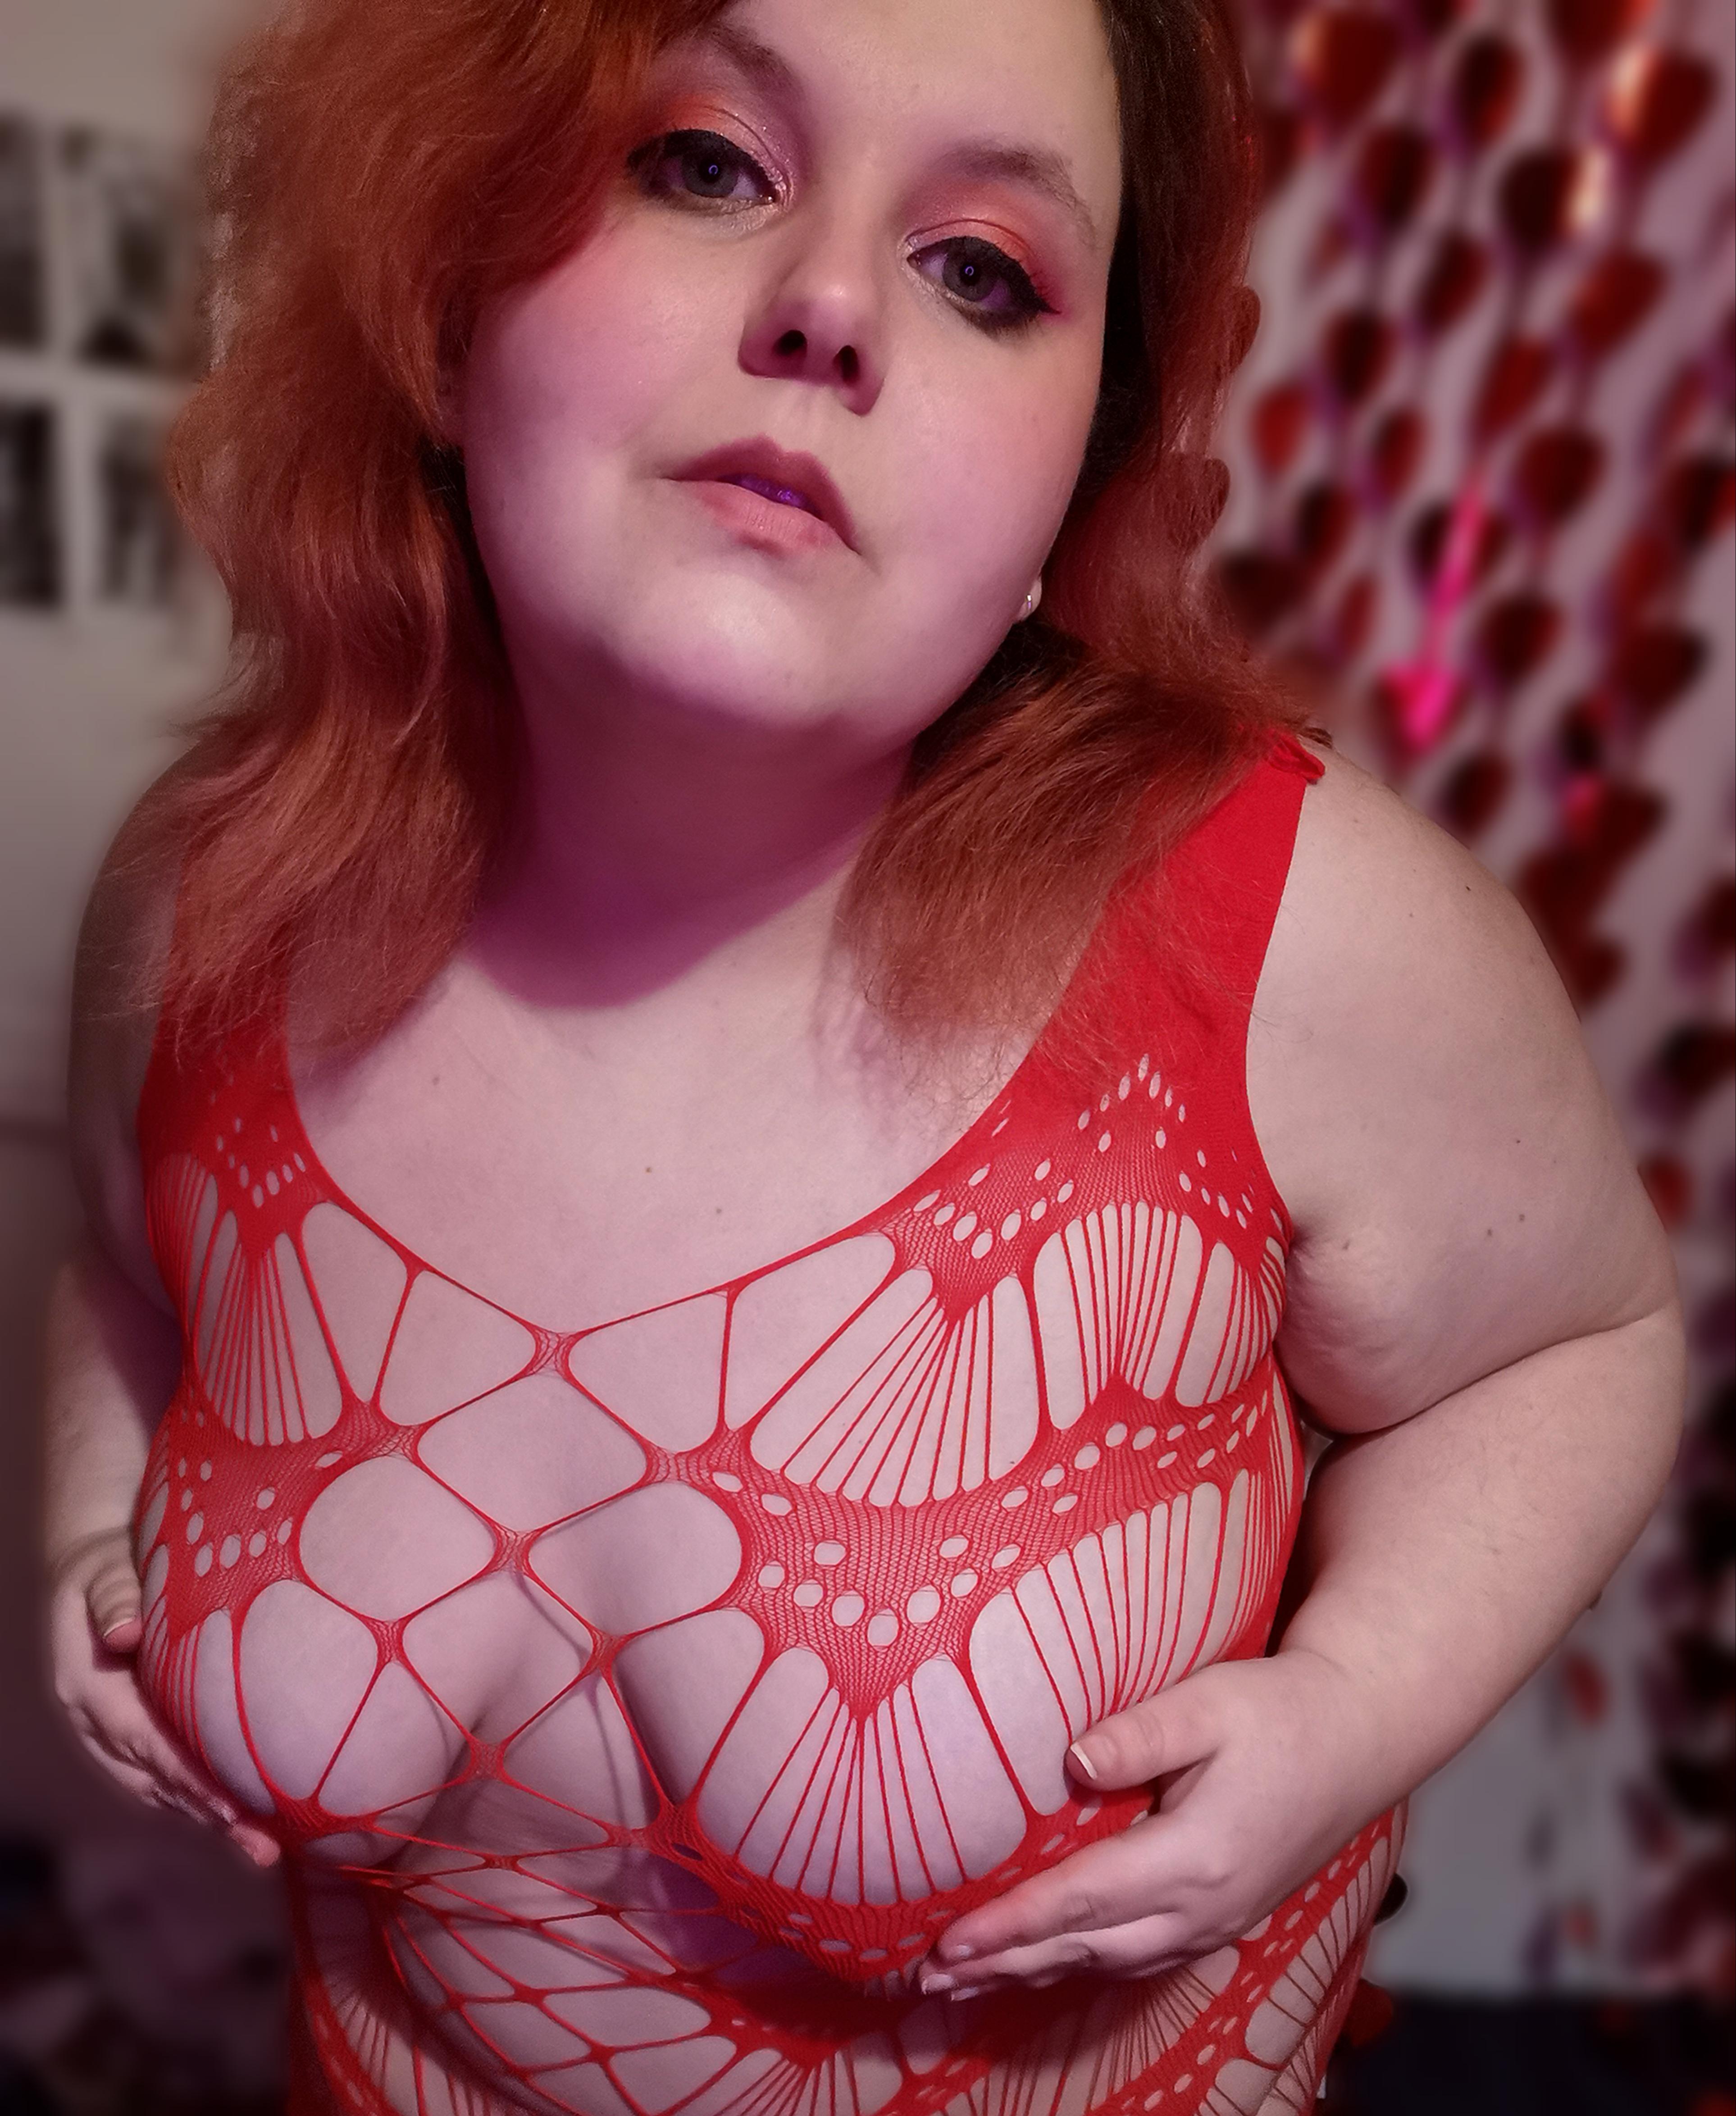 brandi haase recommends hairy bbw solo videos pic